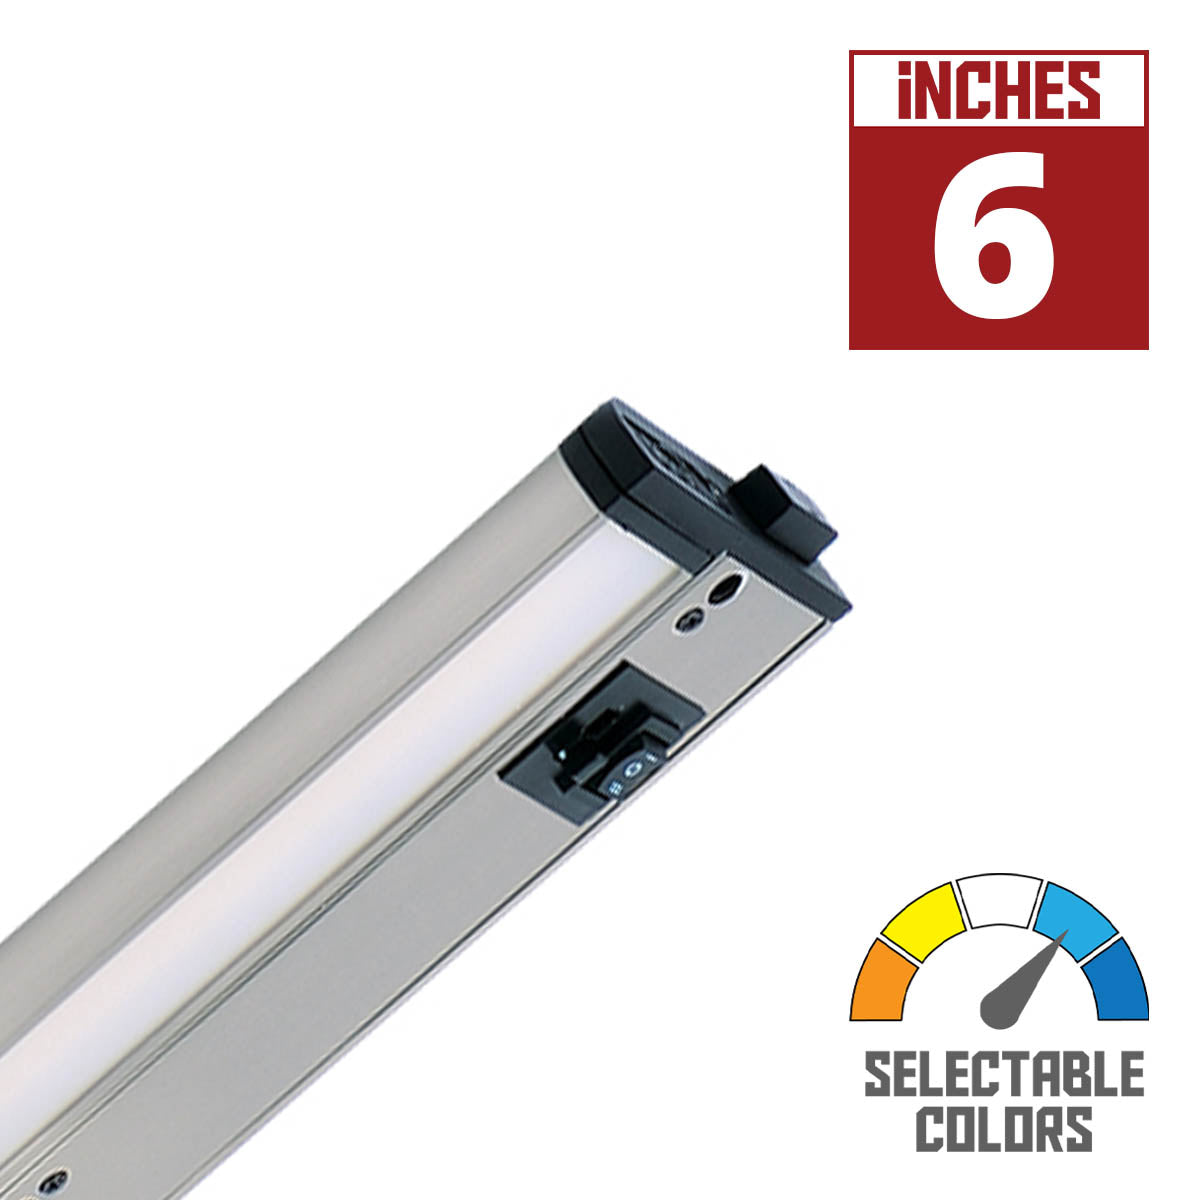 CounterMax 5K 6 Inch Under Cabinet LED Light with Patent gimbals, 360 Lumens, Linkable, CCT Selectable 2700K to 5000K, 120V